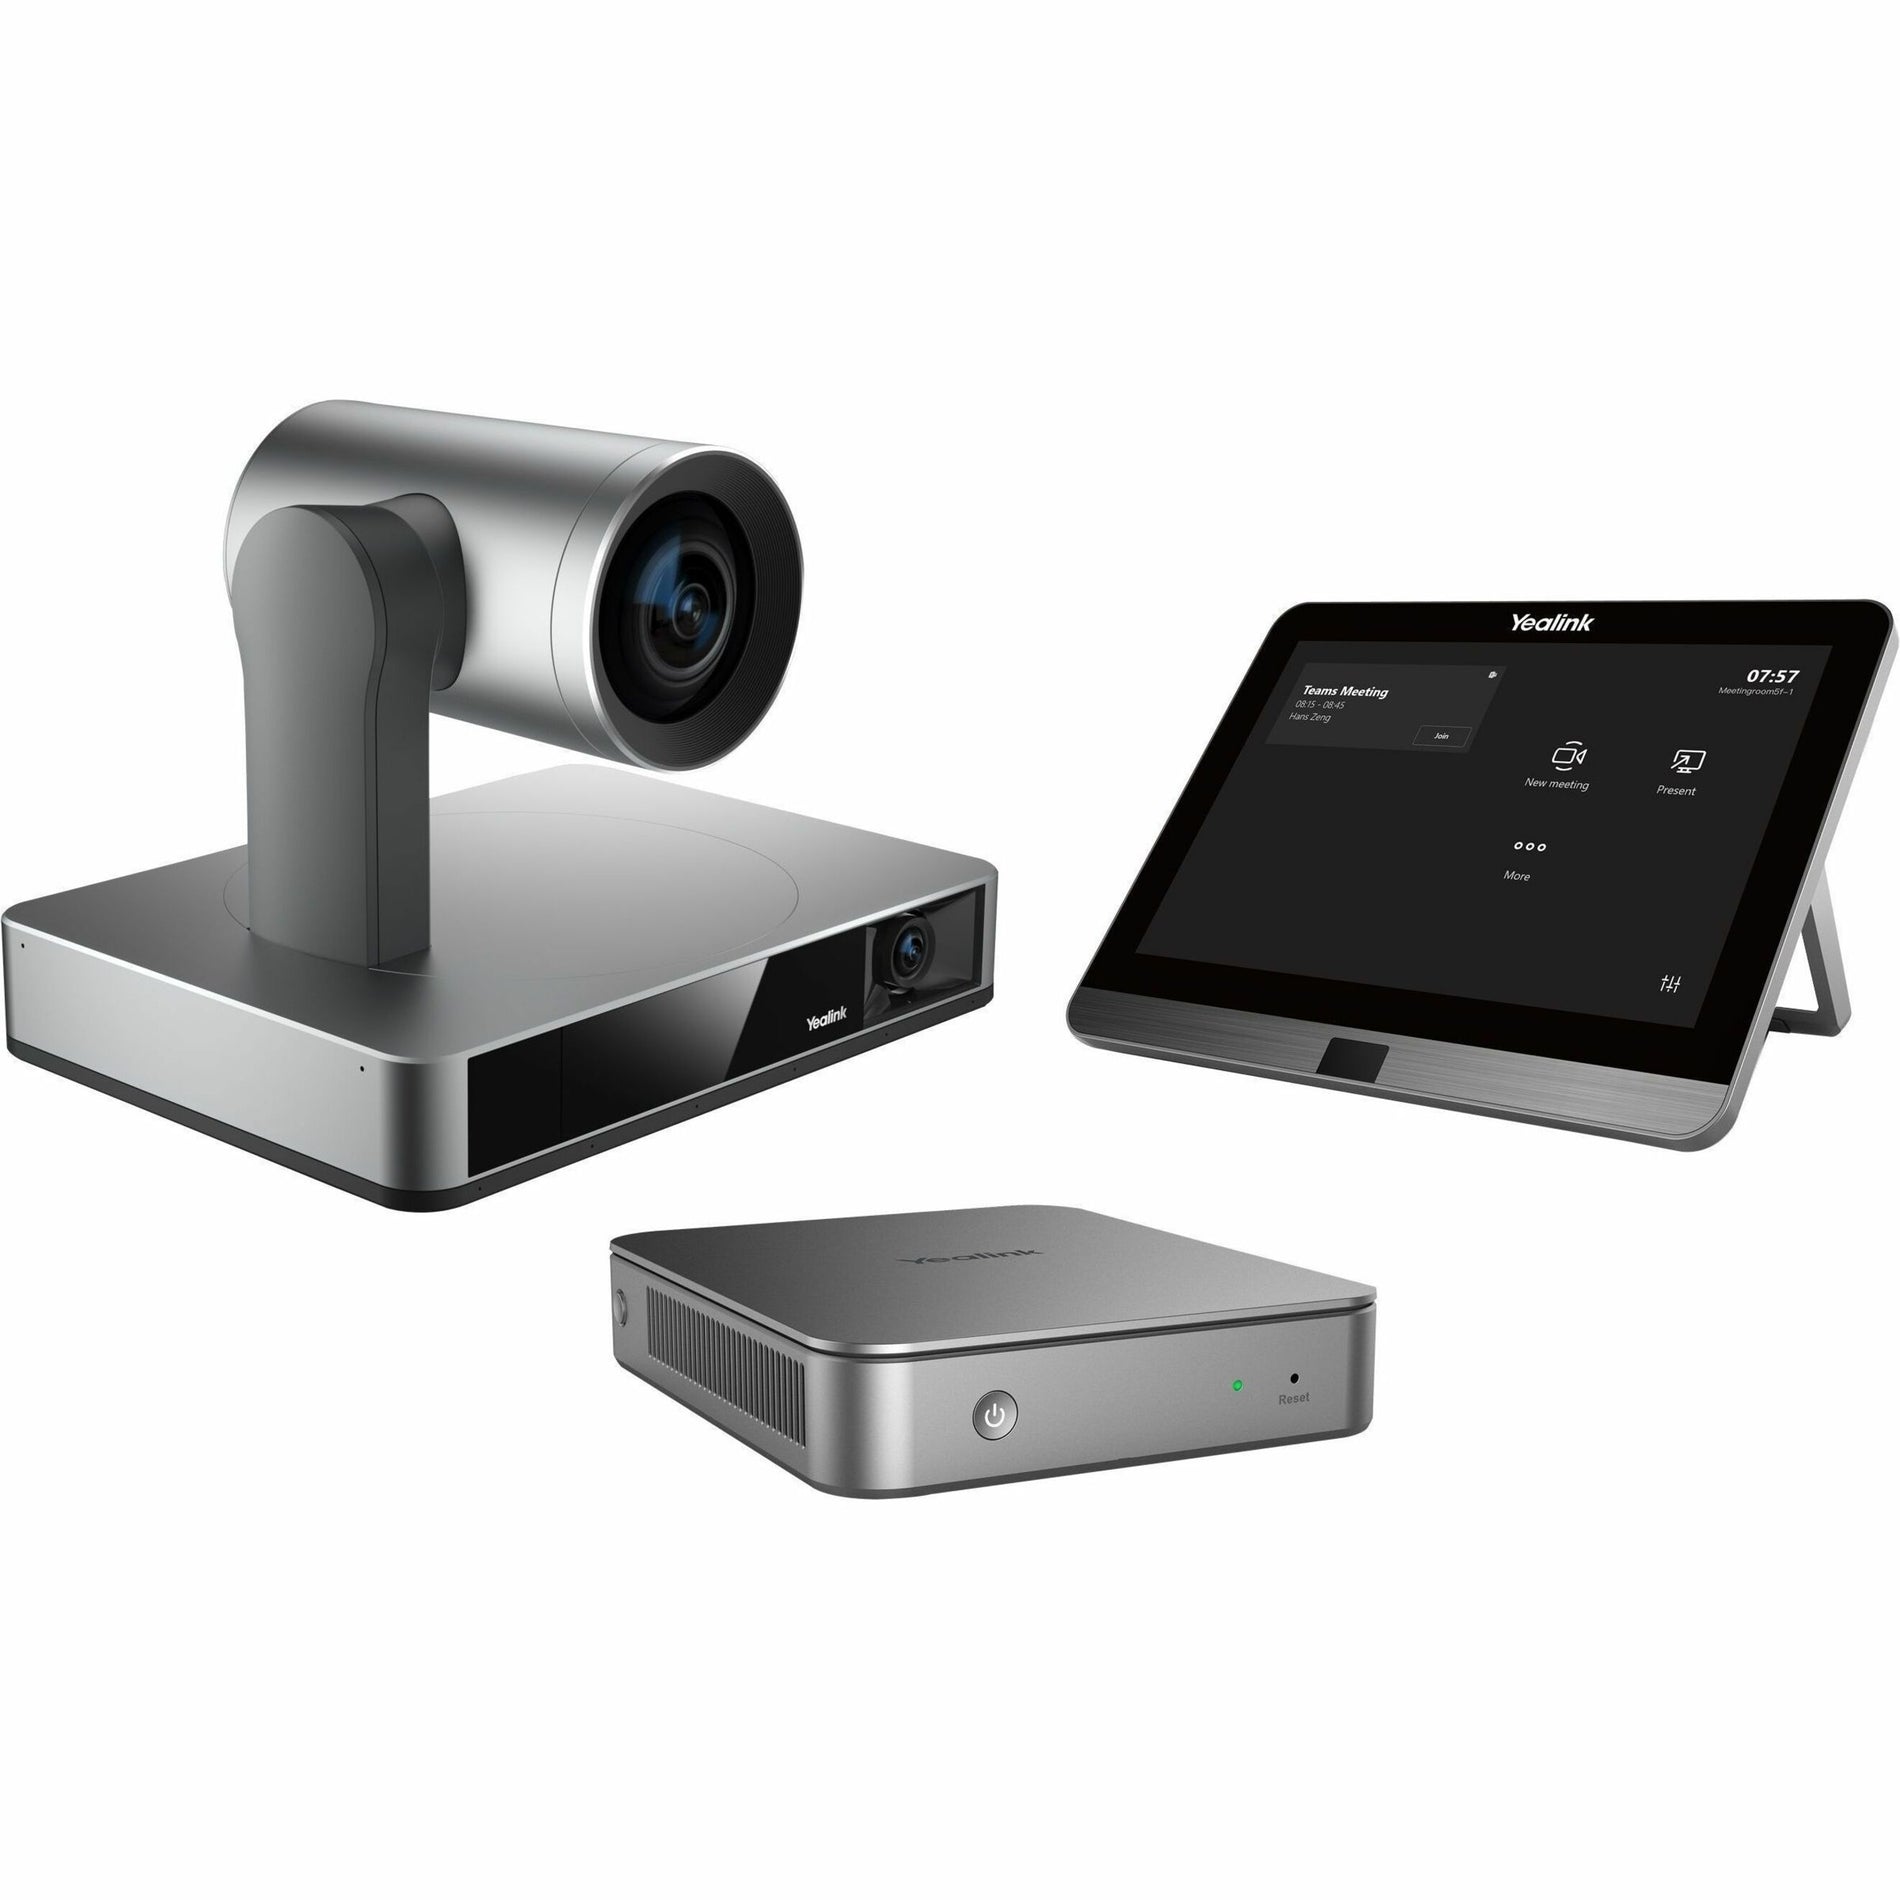 Yealink MVC860-C5-000 Video Conference Equipment, 4K, 30 fps, USB, HDMI Out, Gigabit Ethernet